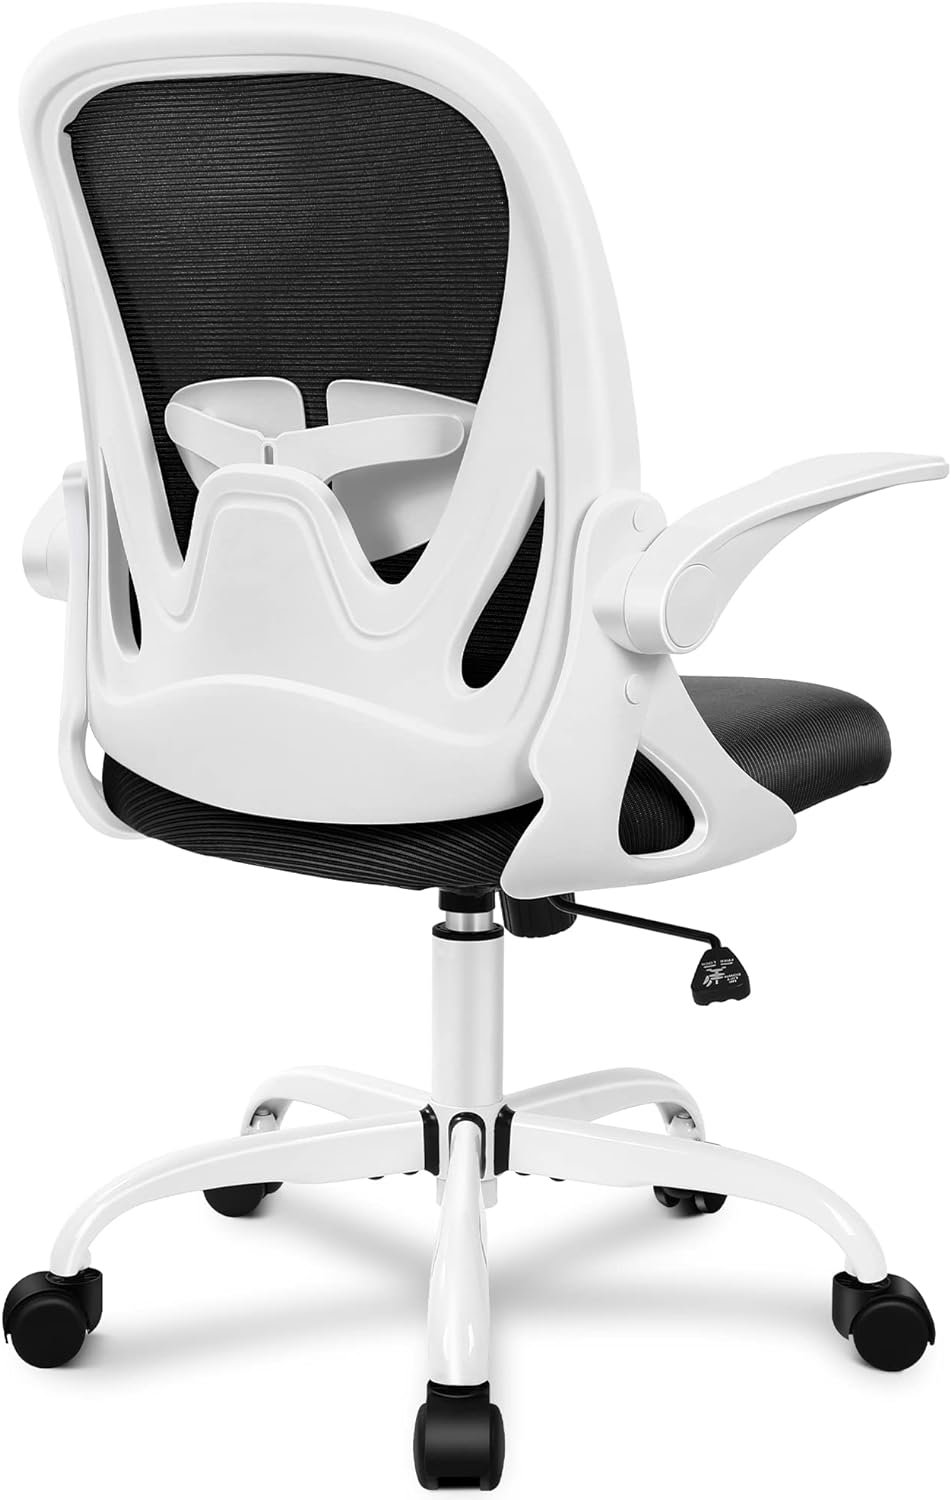 Primy Office Chair Ergonomic Desk Chair Review